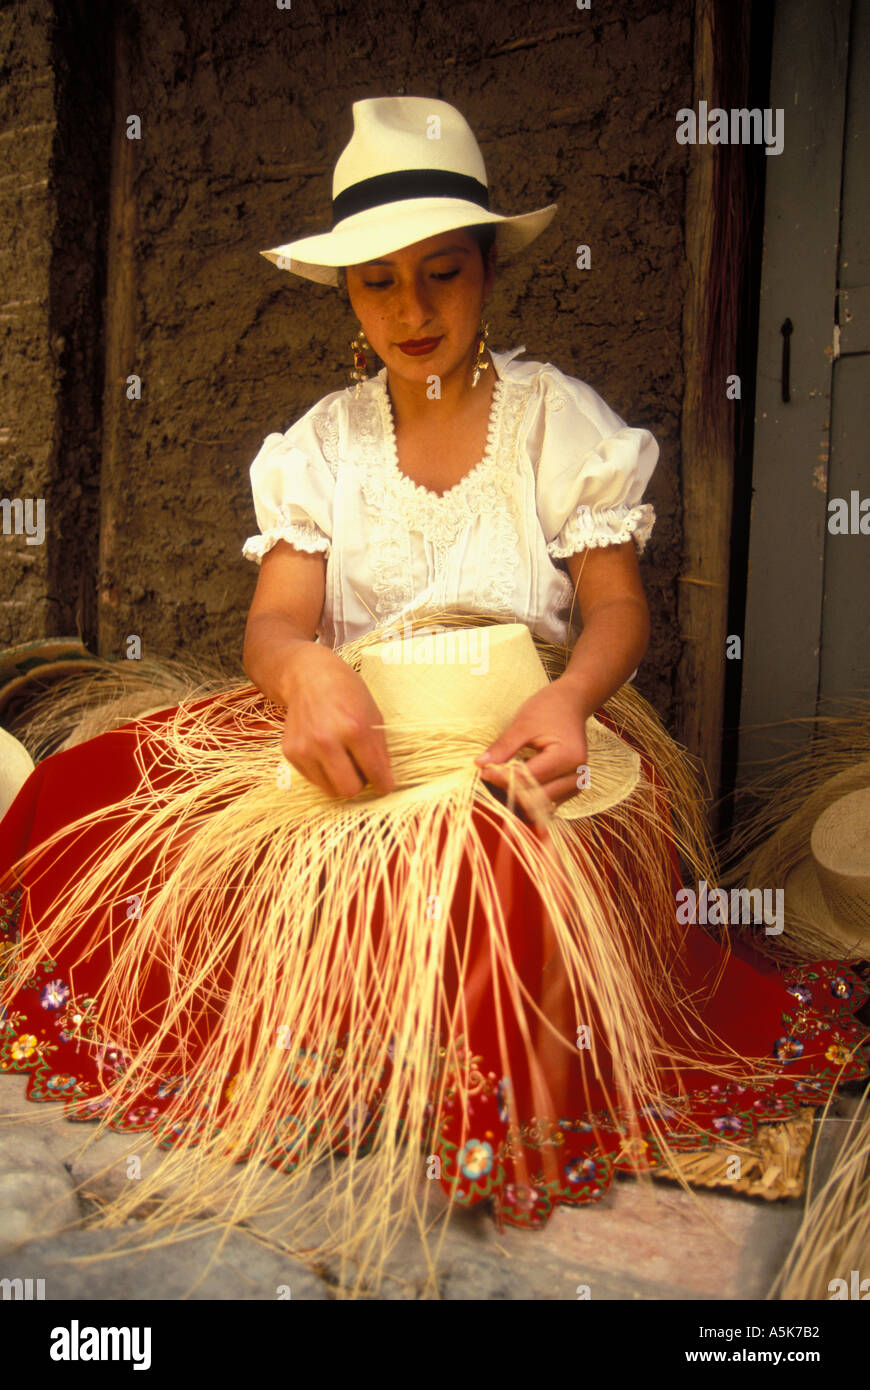 ECUADOR HIGHLANDS, CUENCA Home of the Panama Hat, Woman making Panama Hat by hand Stock Photo